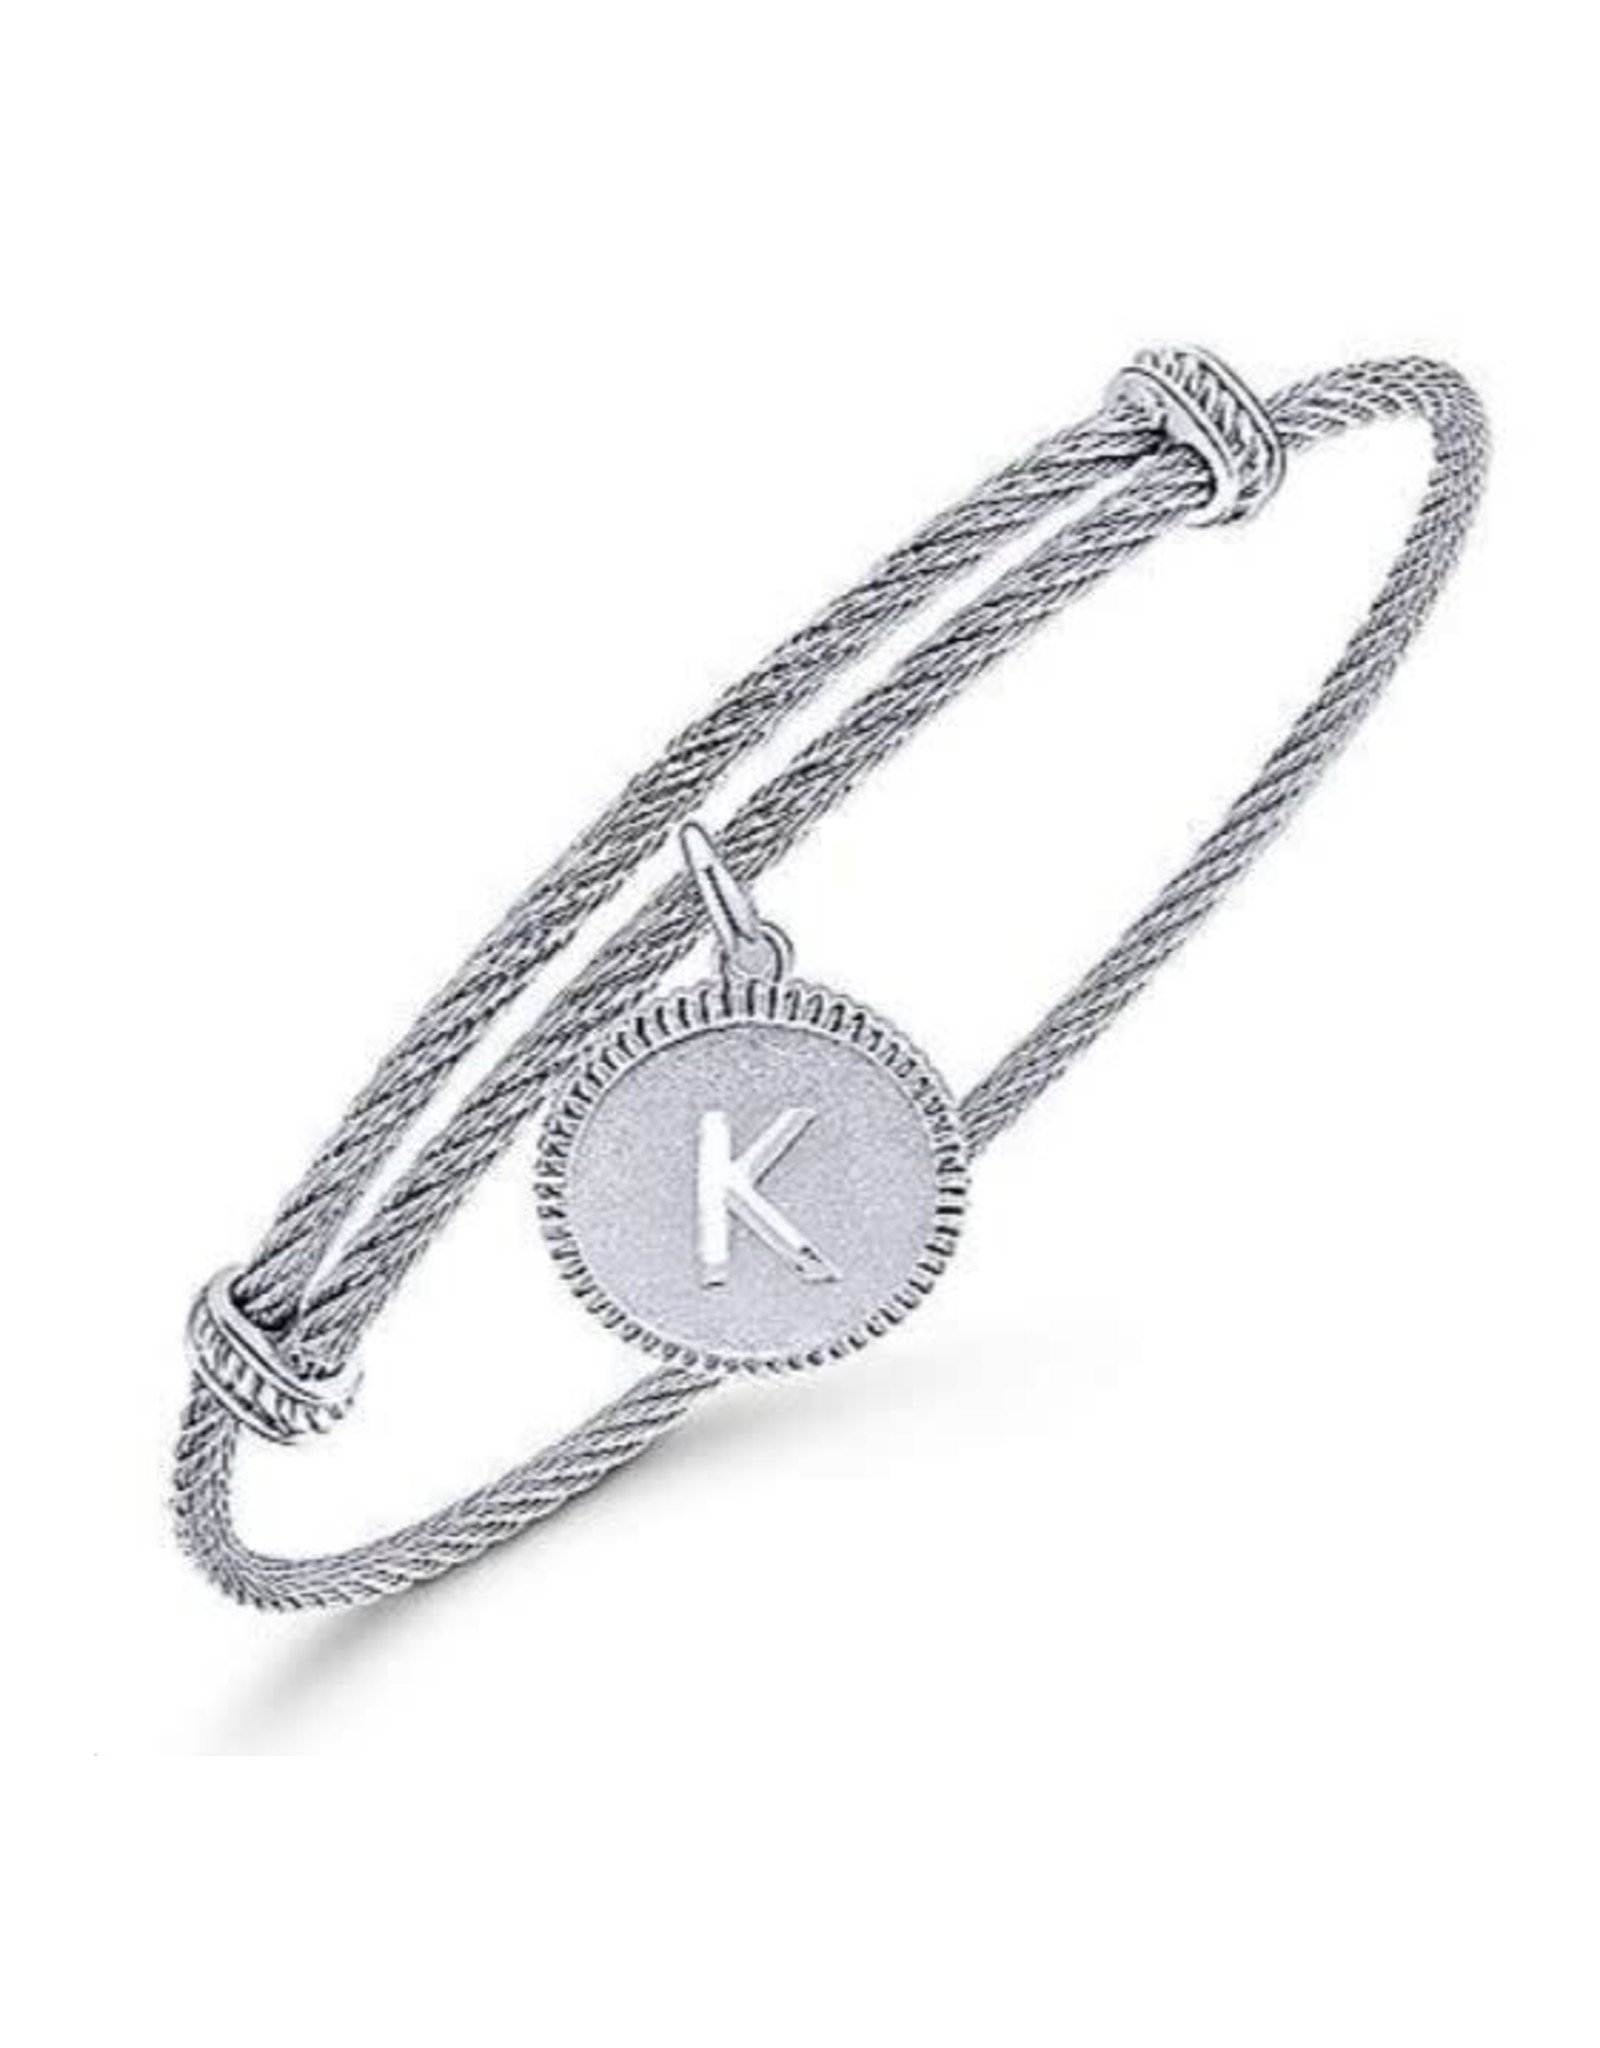 Adjustable Twisted Cable Stainless Steel Bangle with Sterling Silver Initial Charm- BG3632